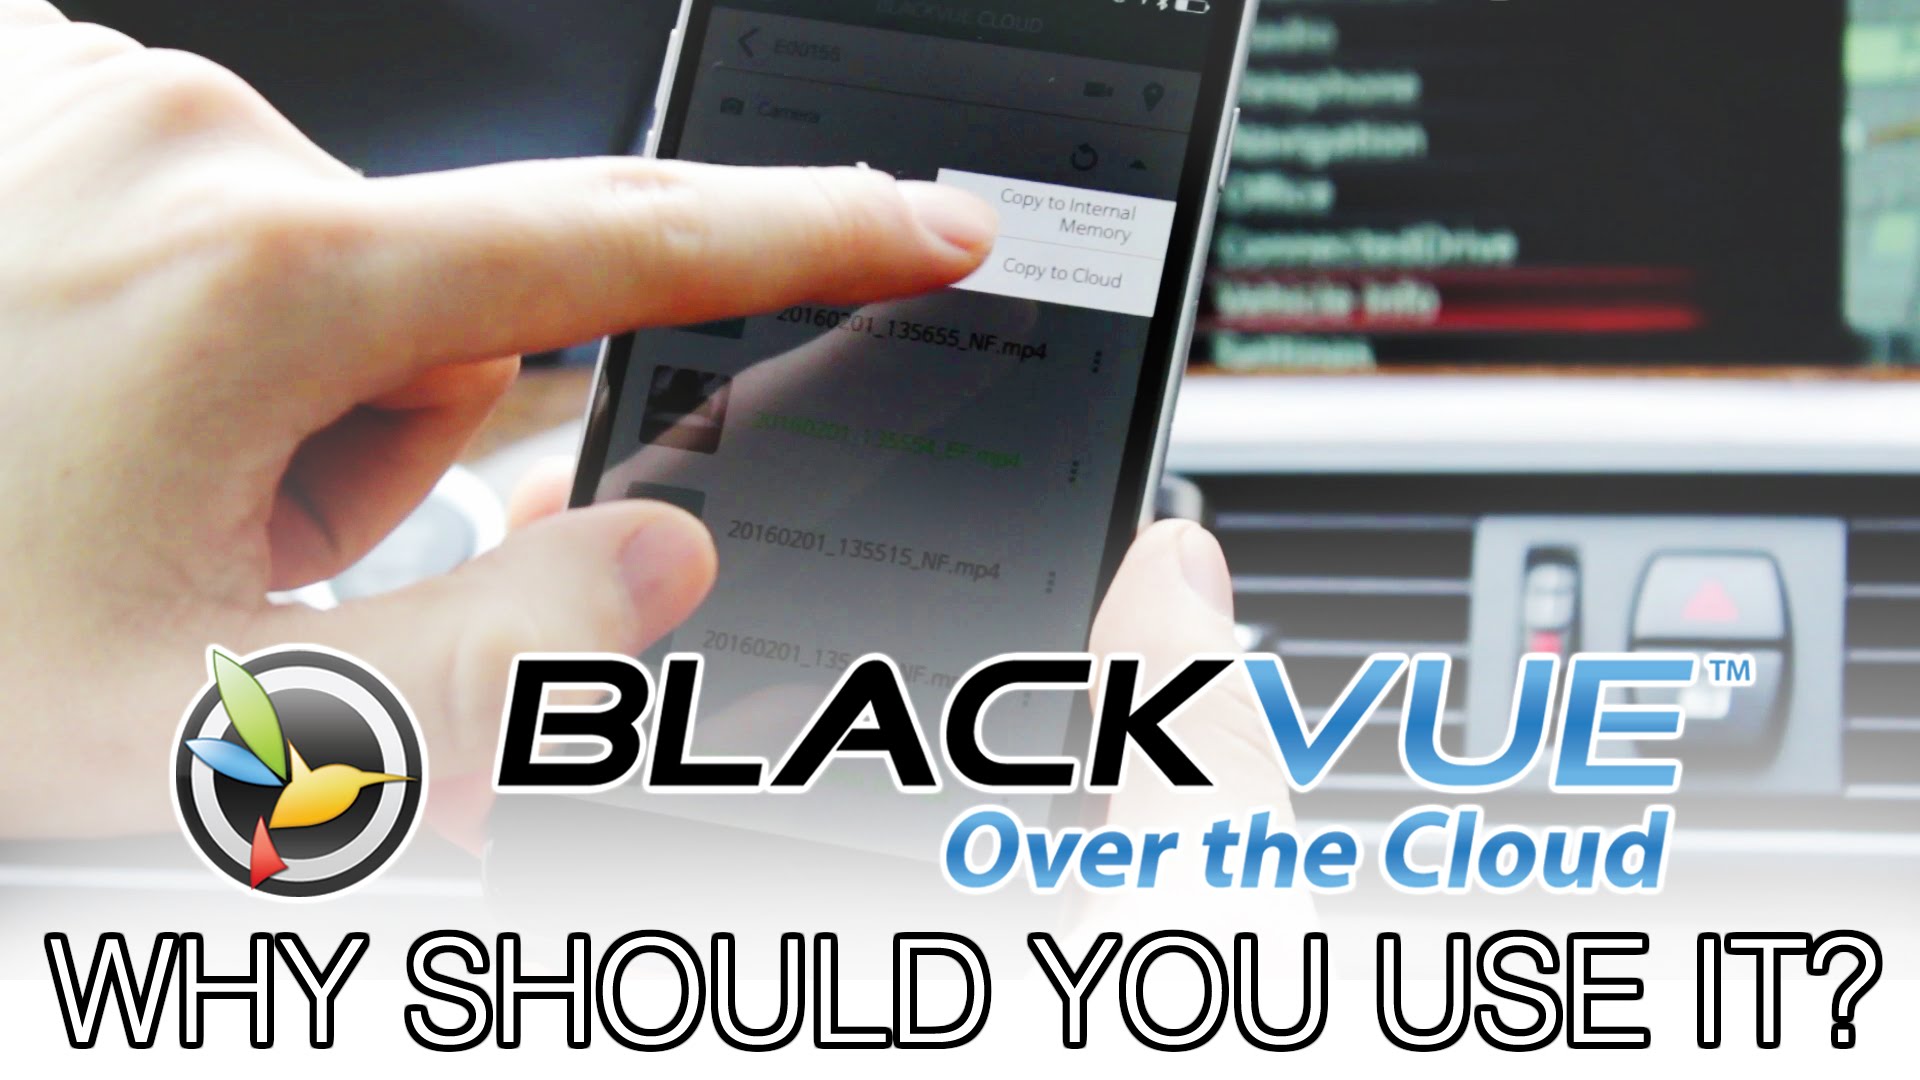 BLACKVUE OVER THE CLOUD – Why Should You Use It?